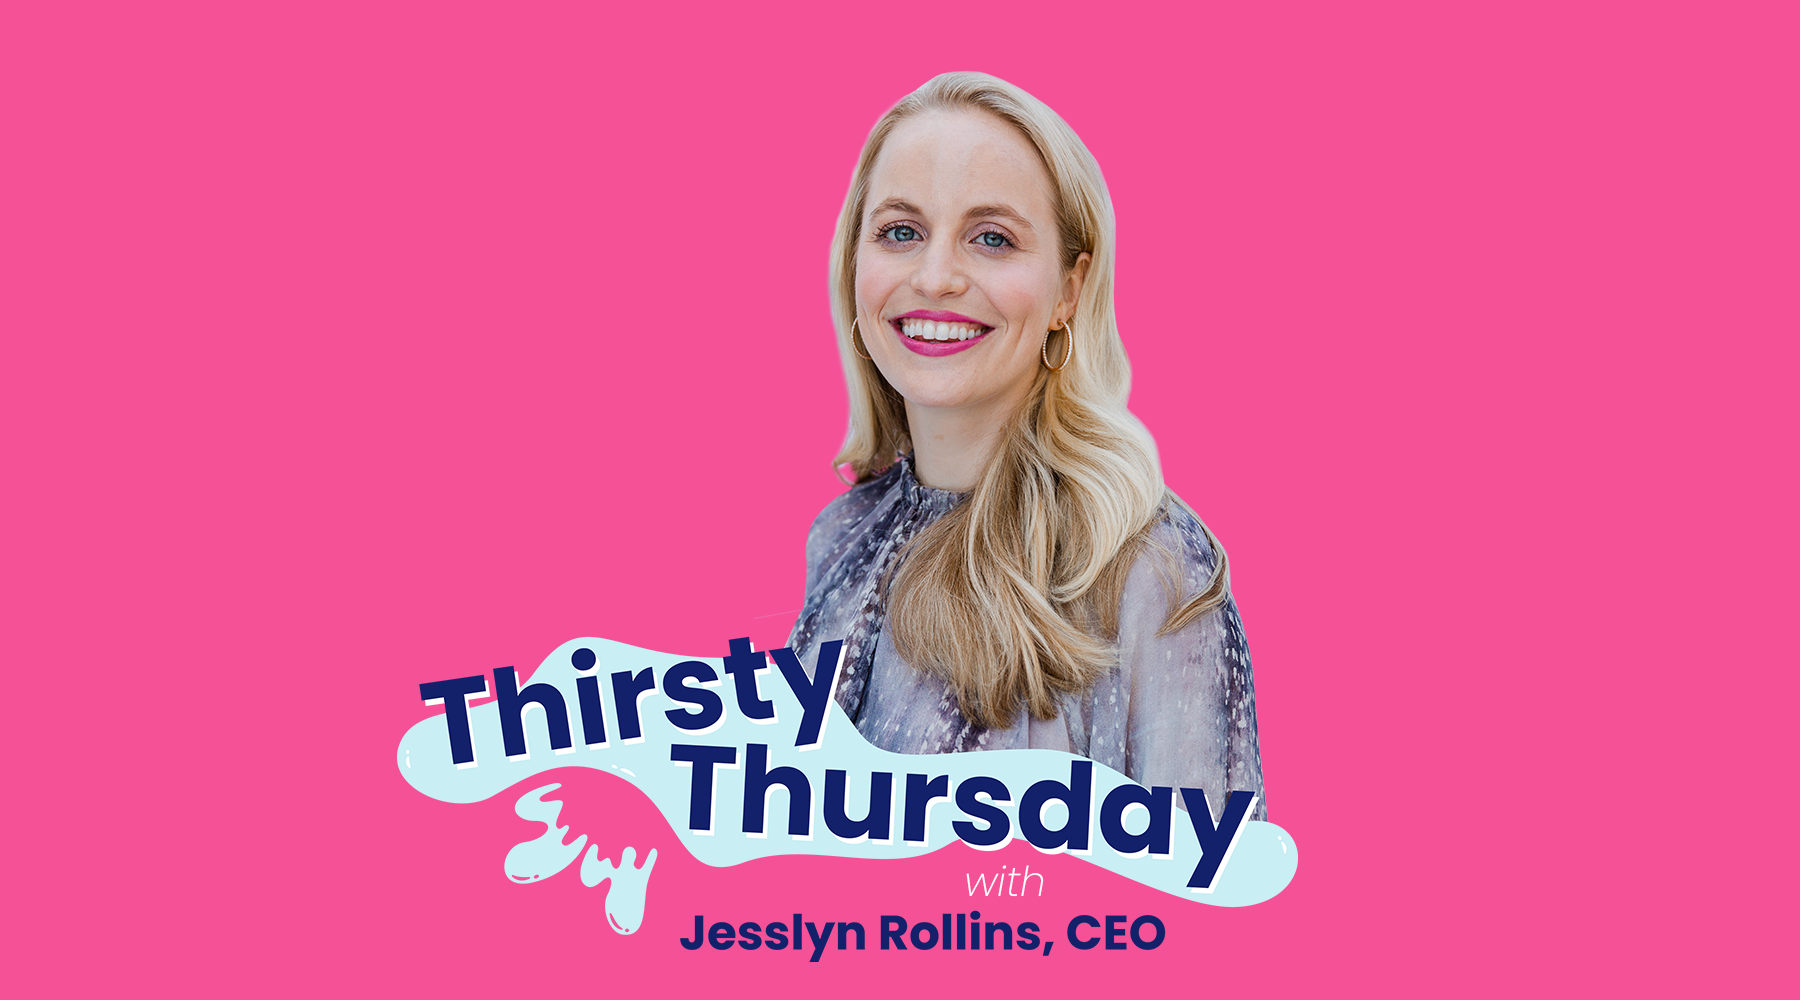 Thirsty Thursday with CEO, Jesslyn Rollins